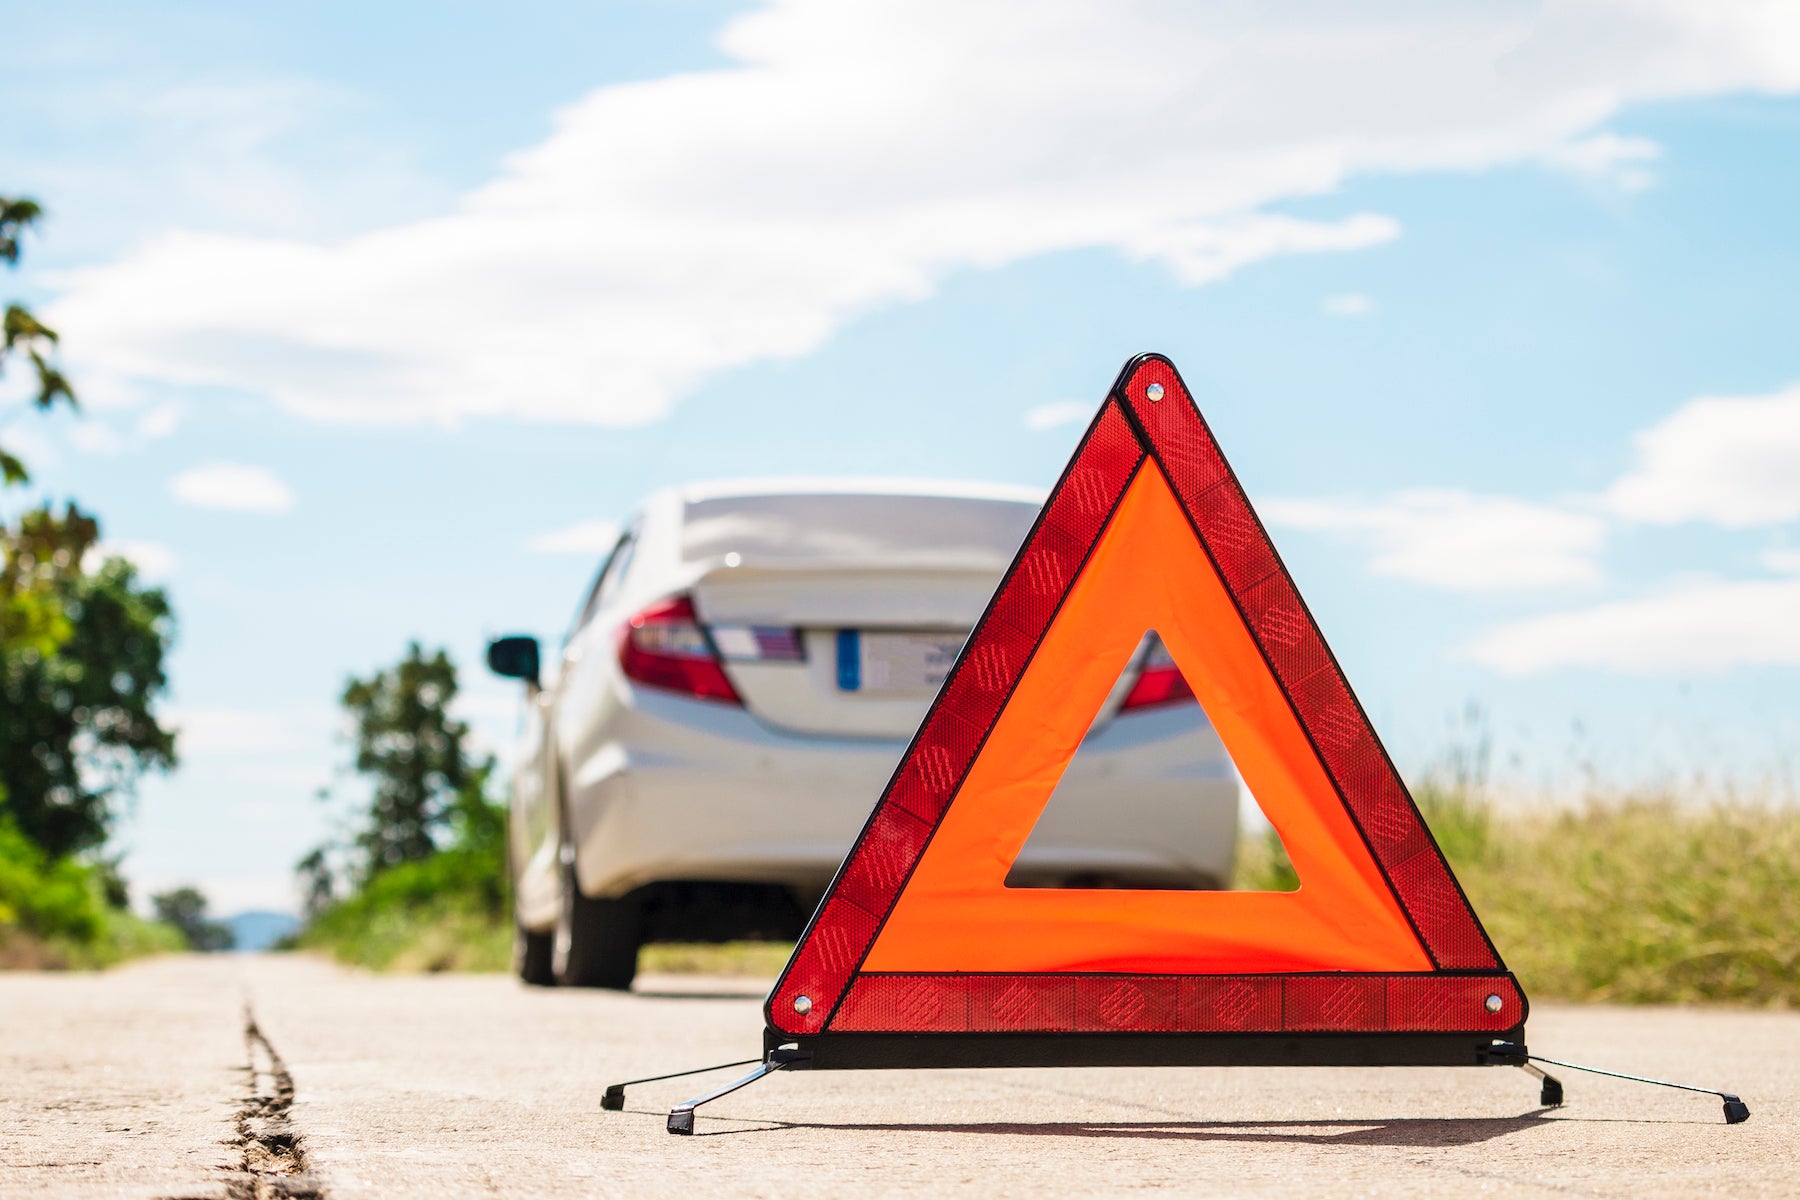 How to change a tire step-by-step guide at Fiore Toyota in Hollidaysburg | Hazard sign behind a car